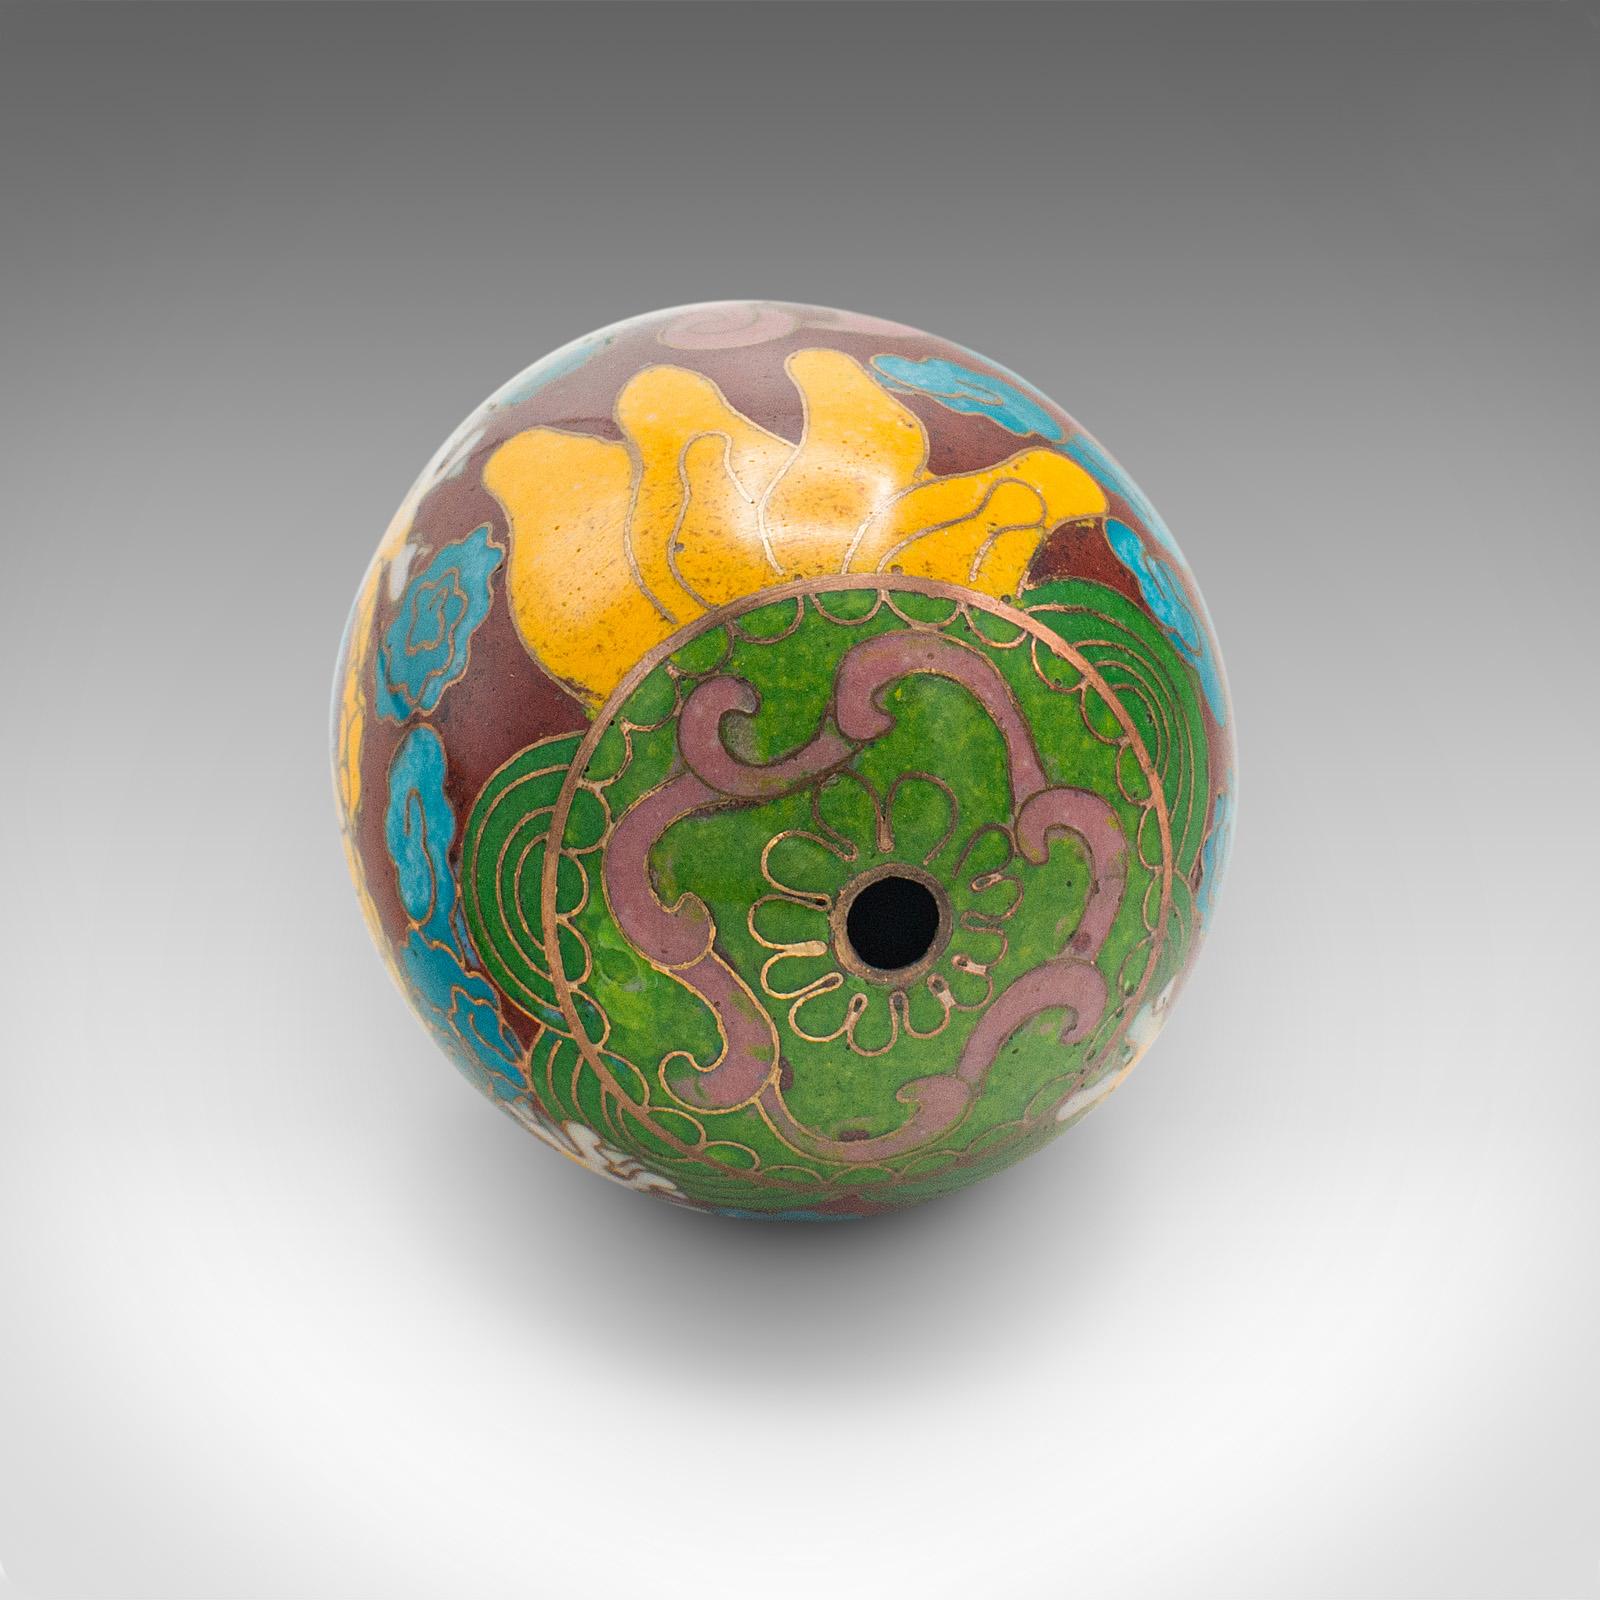 Small Vintage Cloisonne Decorative Egg, Chinese, Enamelled, Ornament, circa 1970 For Sale 4